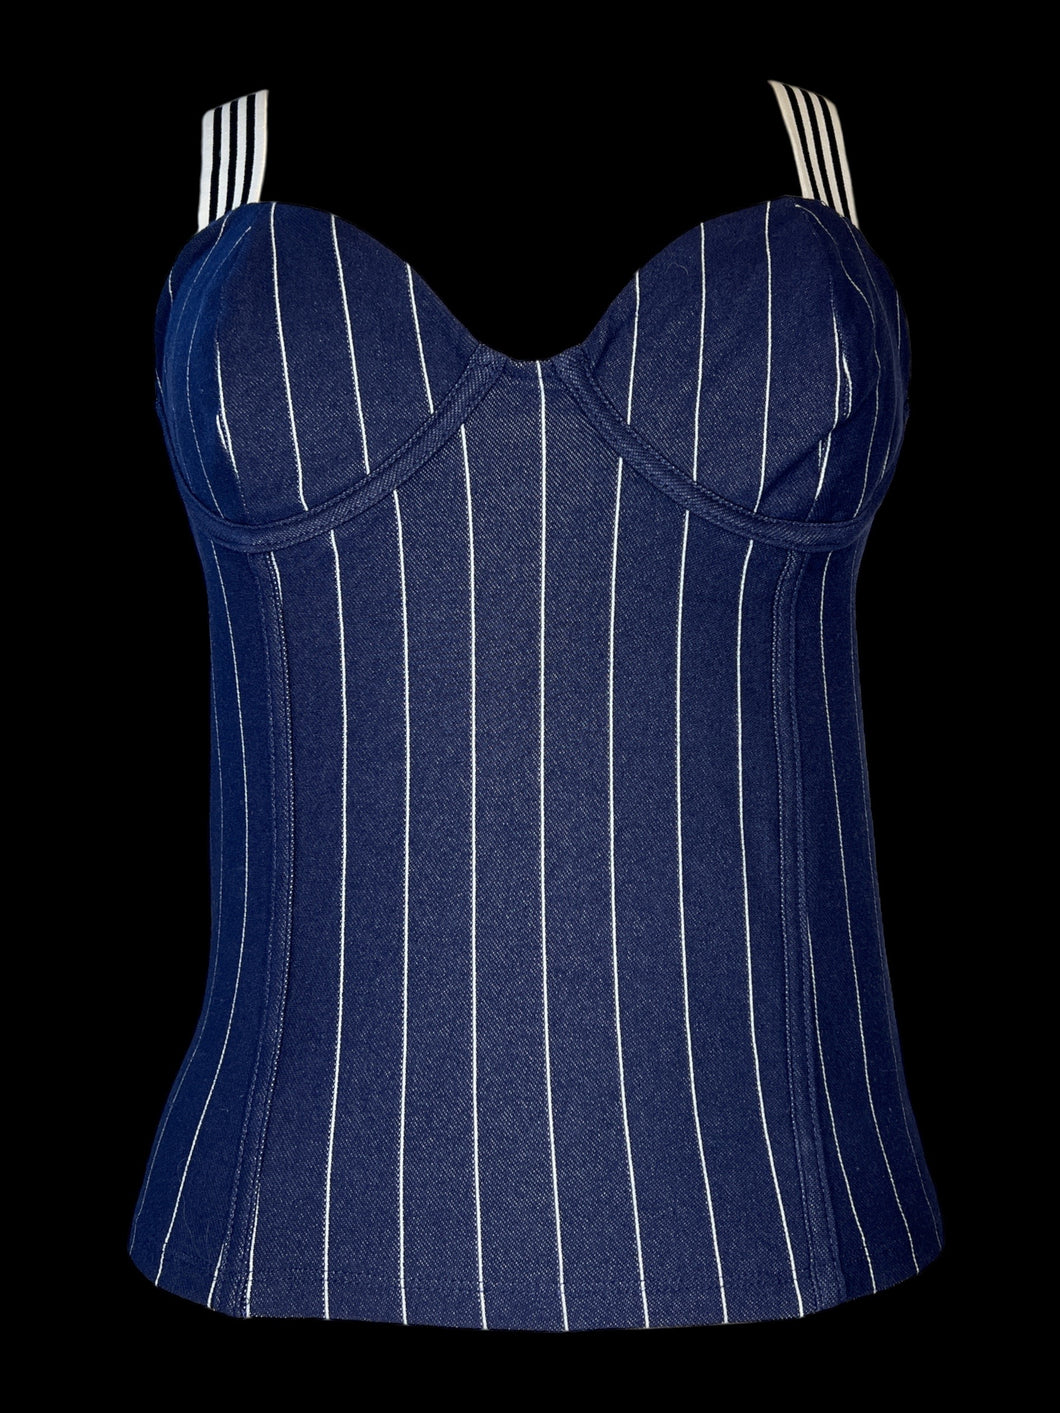 M Blue & white pinstripe sleeveless crop top w/ black & white elastic straps, defined chest, & ruched back